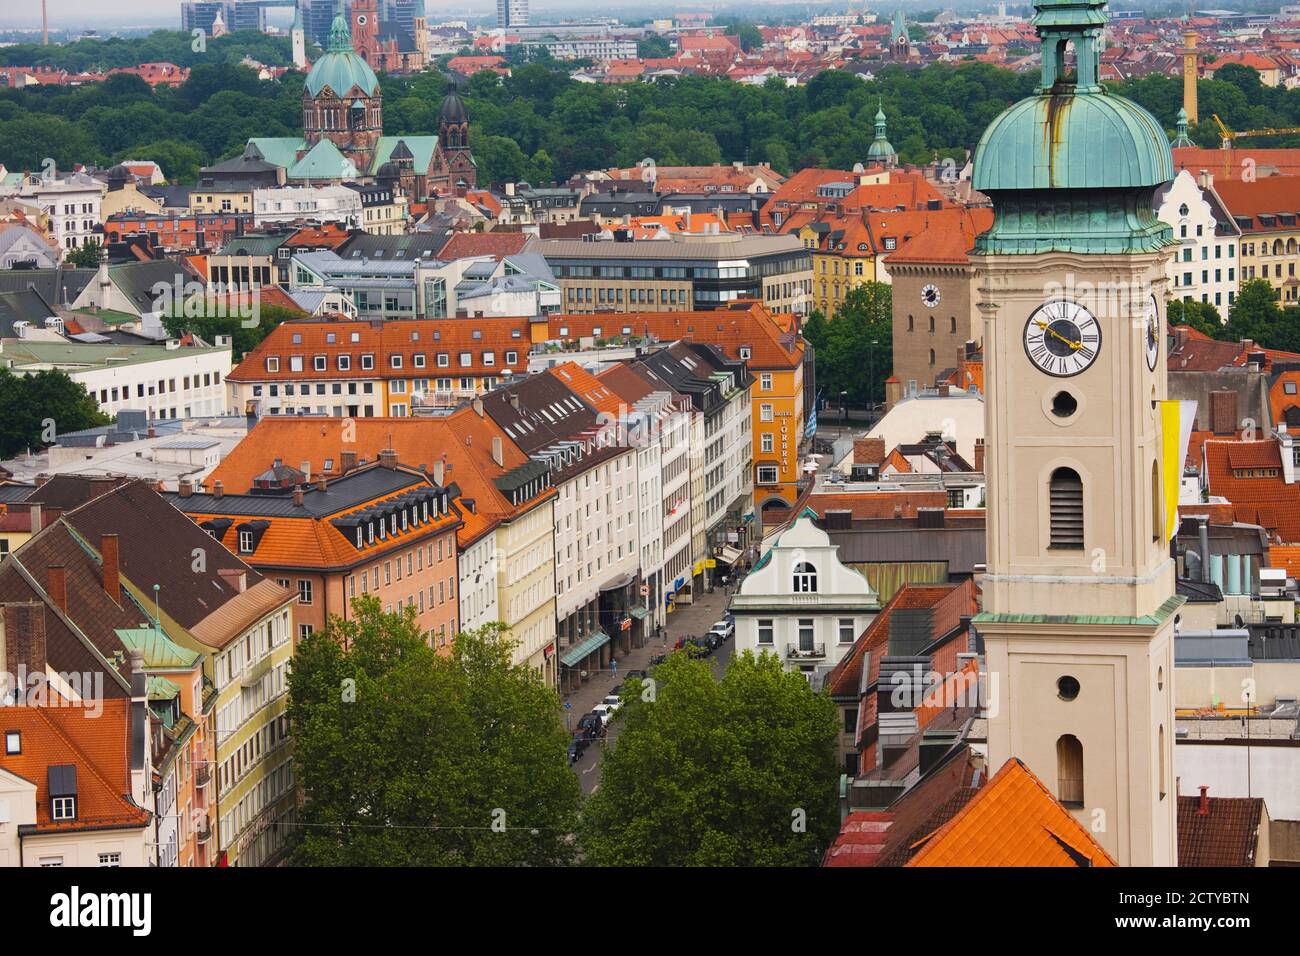 High angle view of buildings with a church in a city, Heiliggeistkirche, Munich, Bavaria, Germany Stock Photo